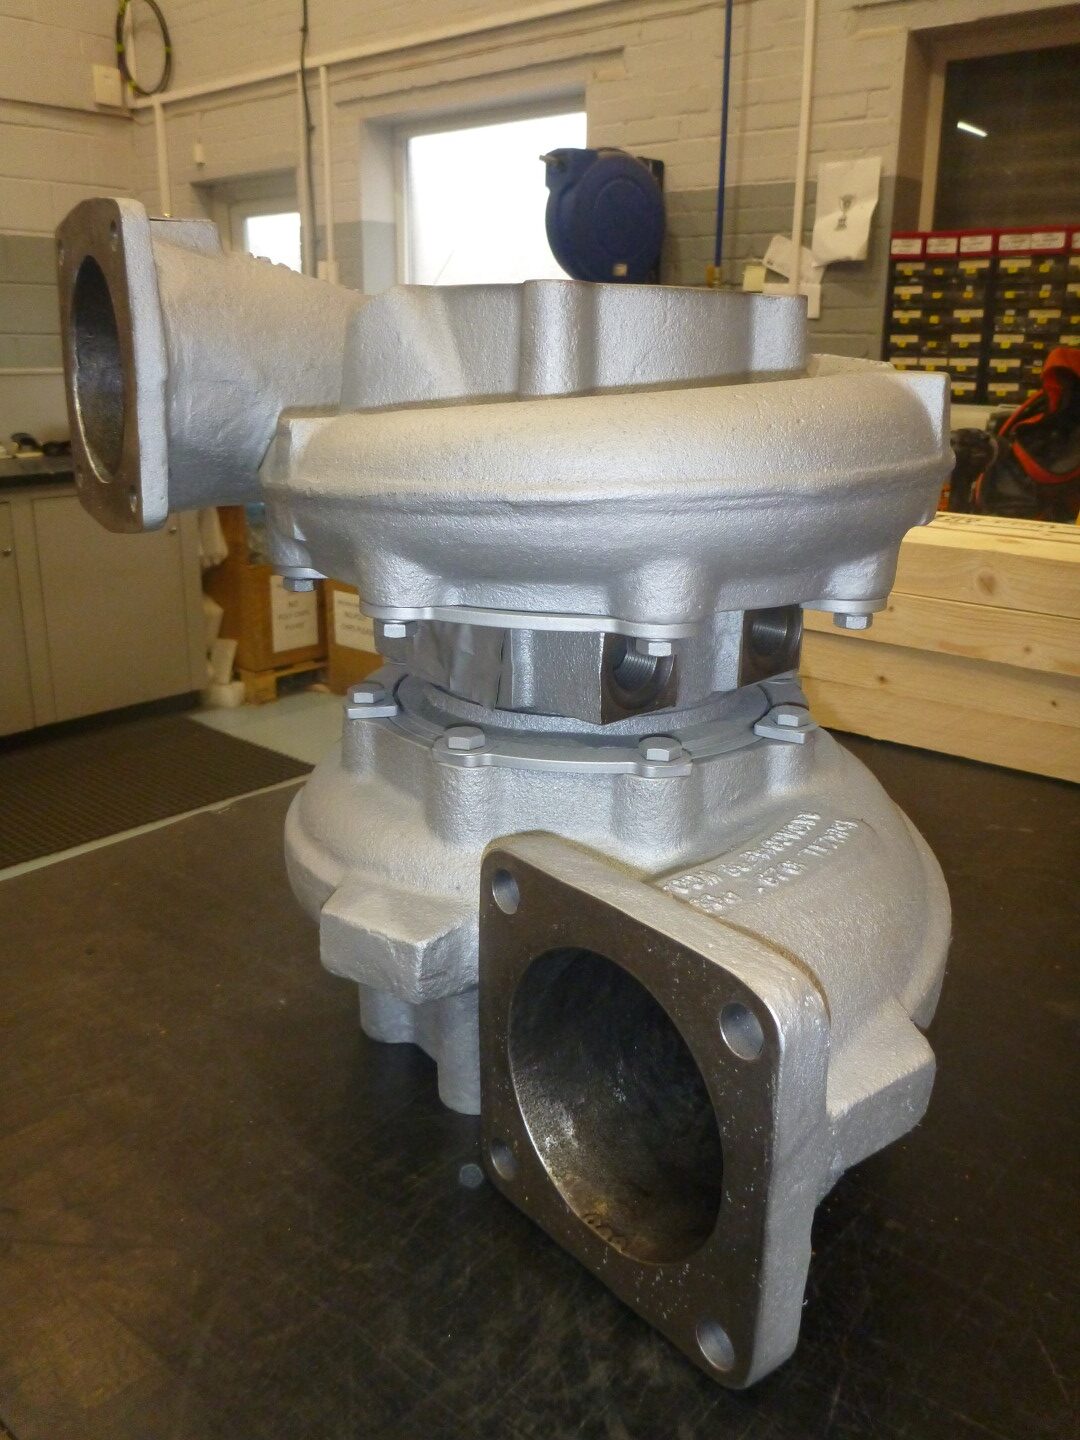 Do your turbochargers suffer from their working environment? 